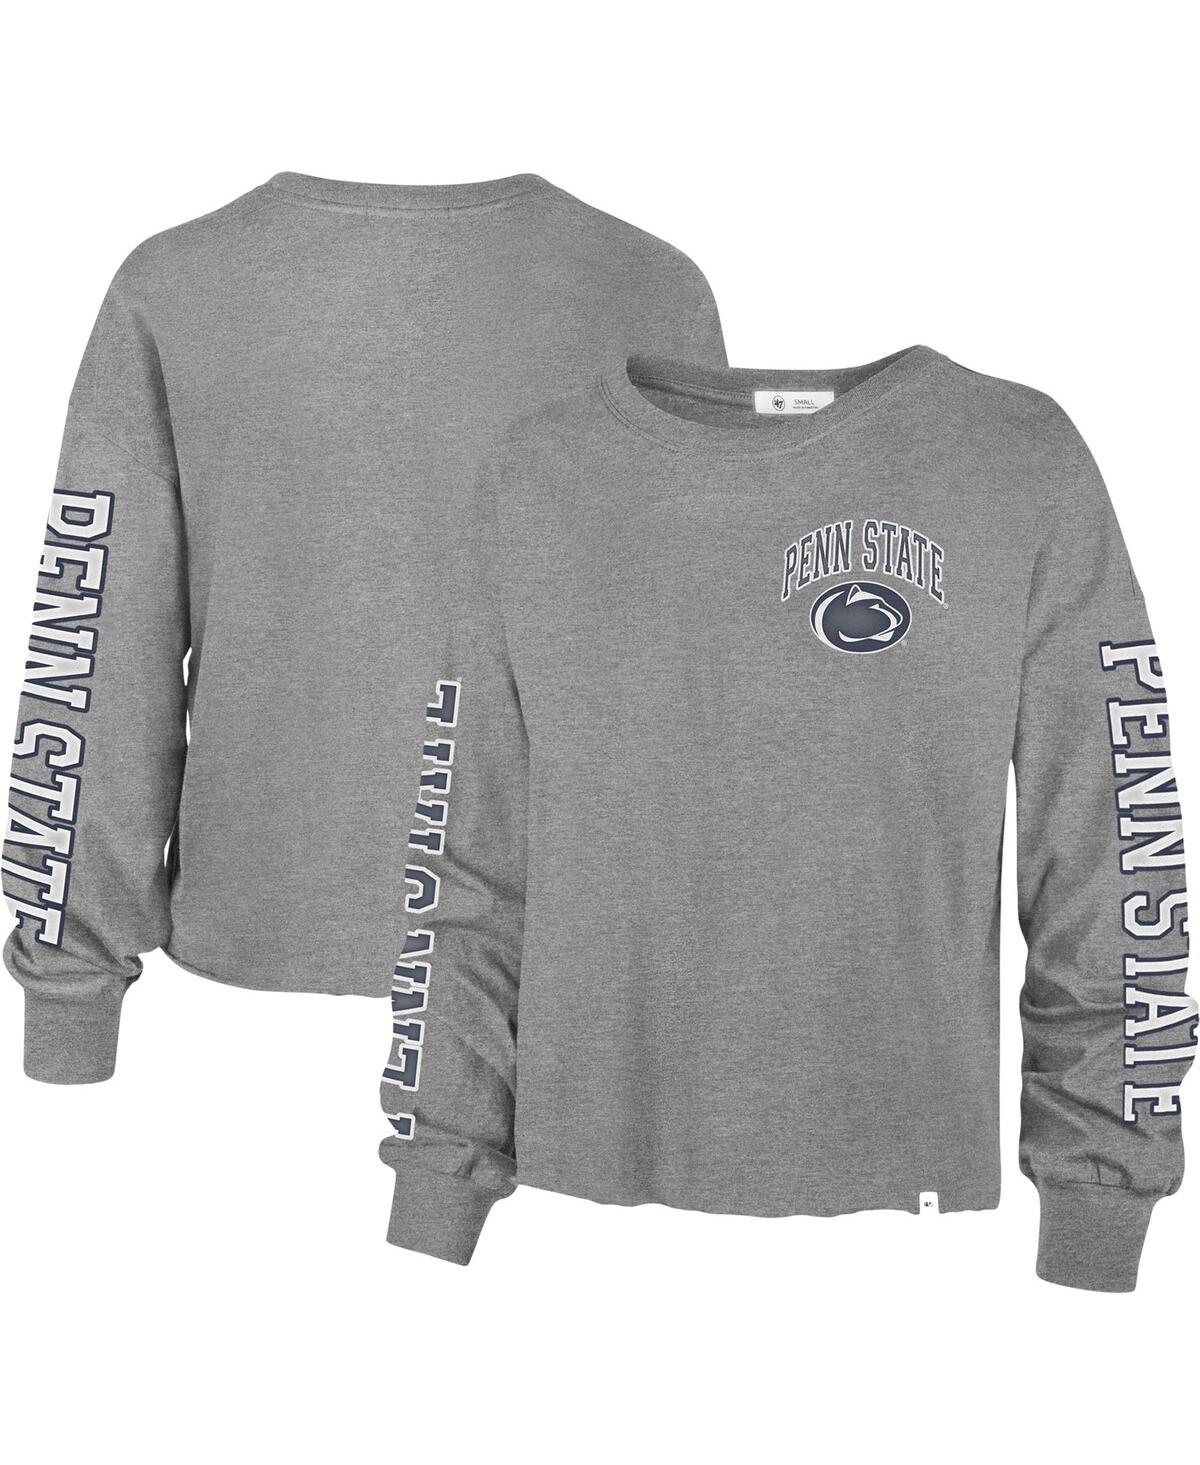 Women's '47 Brand Heathered Gray Penn State Nittany Lions Ultra Max Parkway Long Sleeve Cropped T-shirt - Heathered Gray